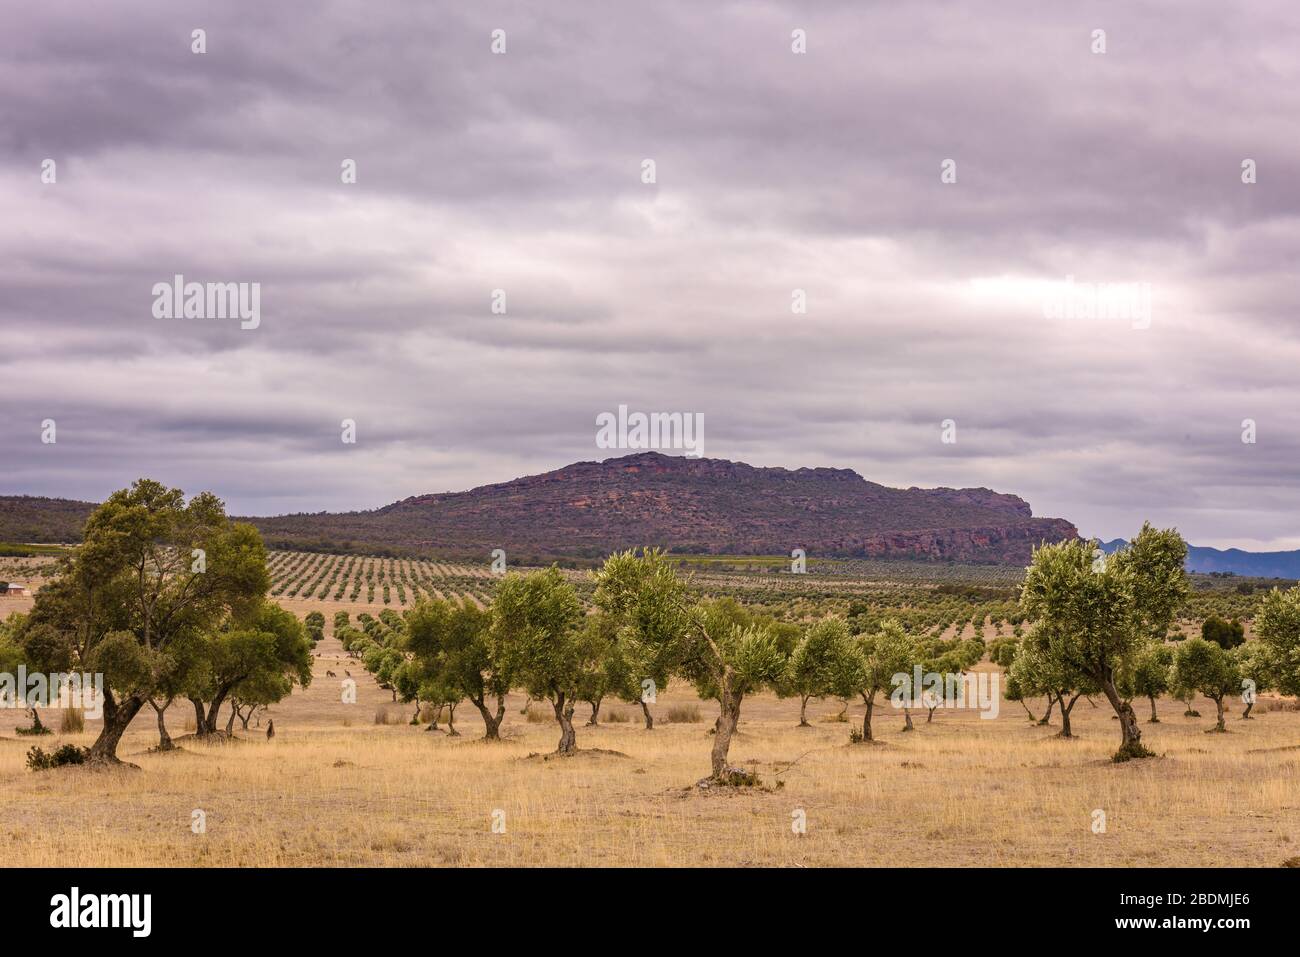 A view from high across an extensive Olive plantation bordering the Grampians National park in Victoria with storm clouds brewing in the sky. Stock Photo